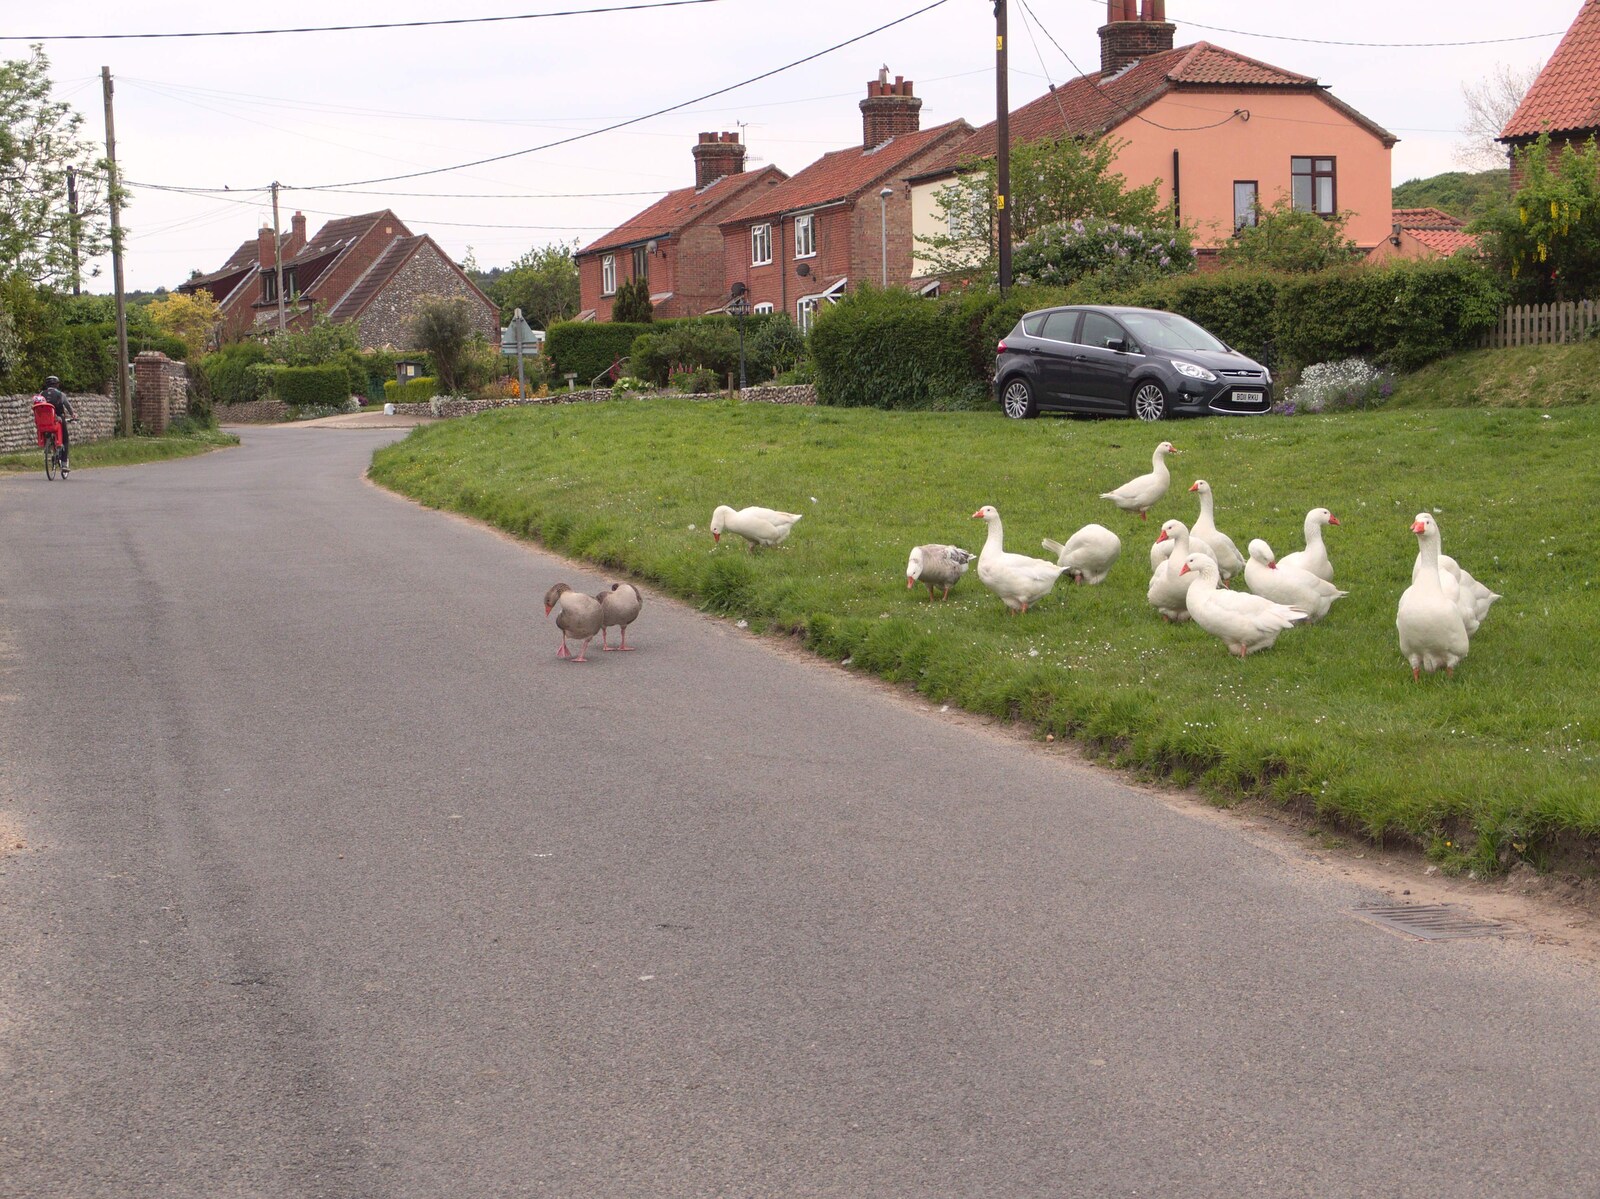 A gaggle of geese in East Runton from A Birthday Camping Trip, East Runton, North Norfolk - 26th May 2015